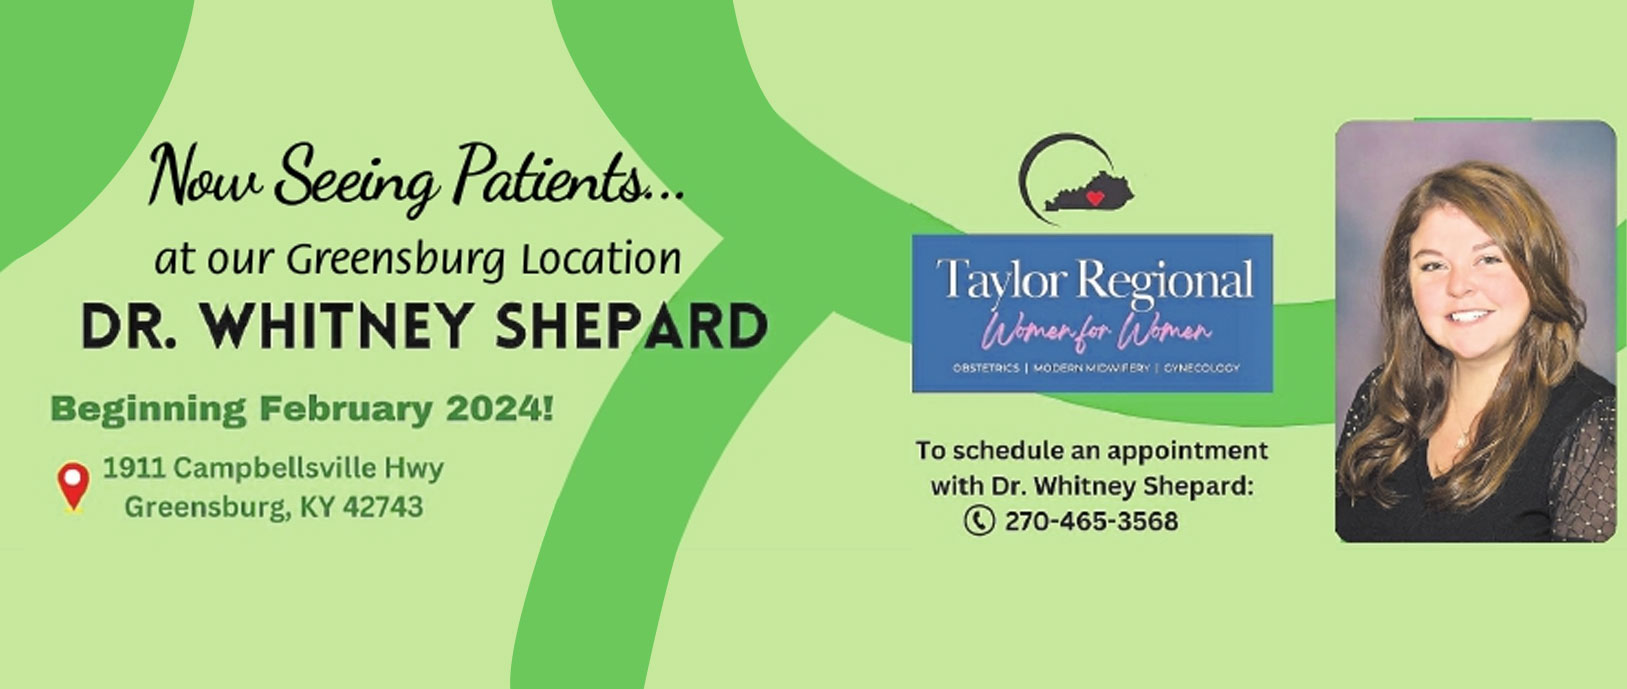 Now Seeing Patients  at our Greensburg Location
Dr. Whitney Shepard
Beginning February 2024
1911 Campbellsville Huy
Greensburg, Kentucky 42743

Taylor Regional Women for women 

To schedule an appointment with Dr. Whitney Shepard
270-465-3568

Beginning February 2024!

1911 Campbellsville Hwy Greensburg, KY 42743

To schedule an appointment with Dr. Whitney Shepard: 270-465-3568